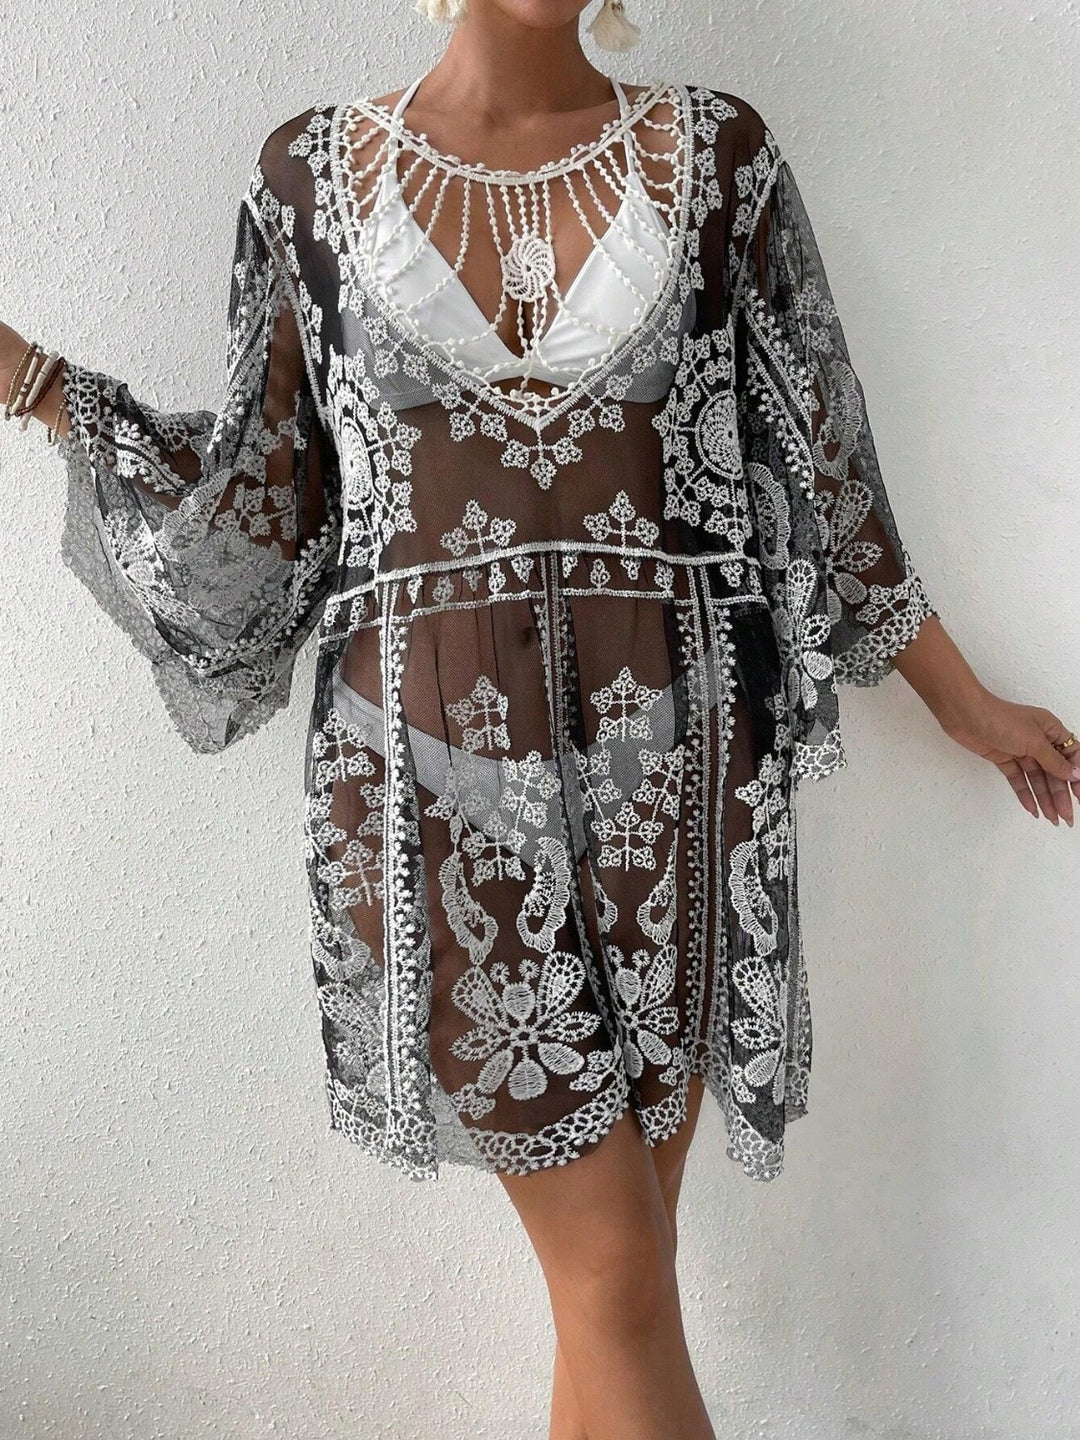 Lace Round Neck Cover-Up